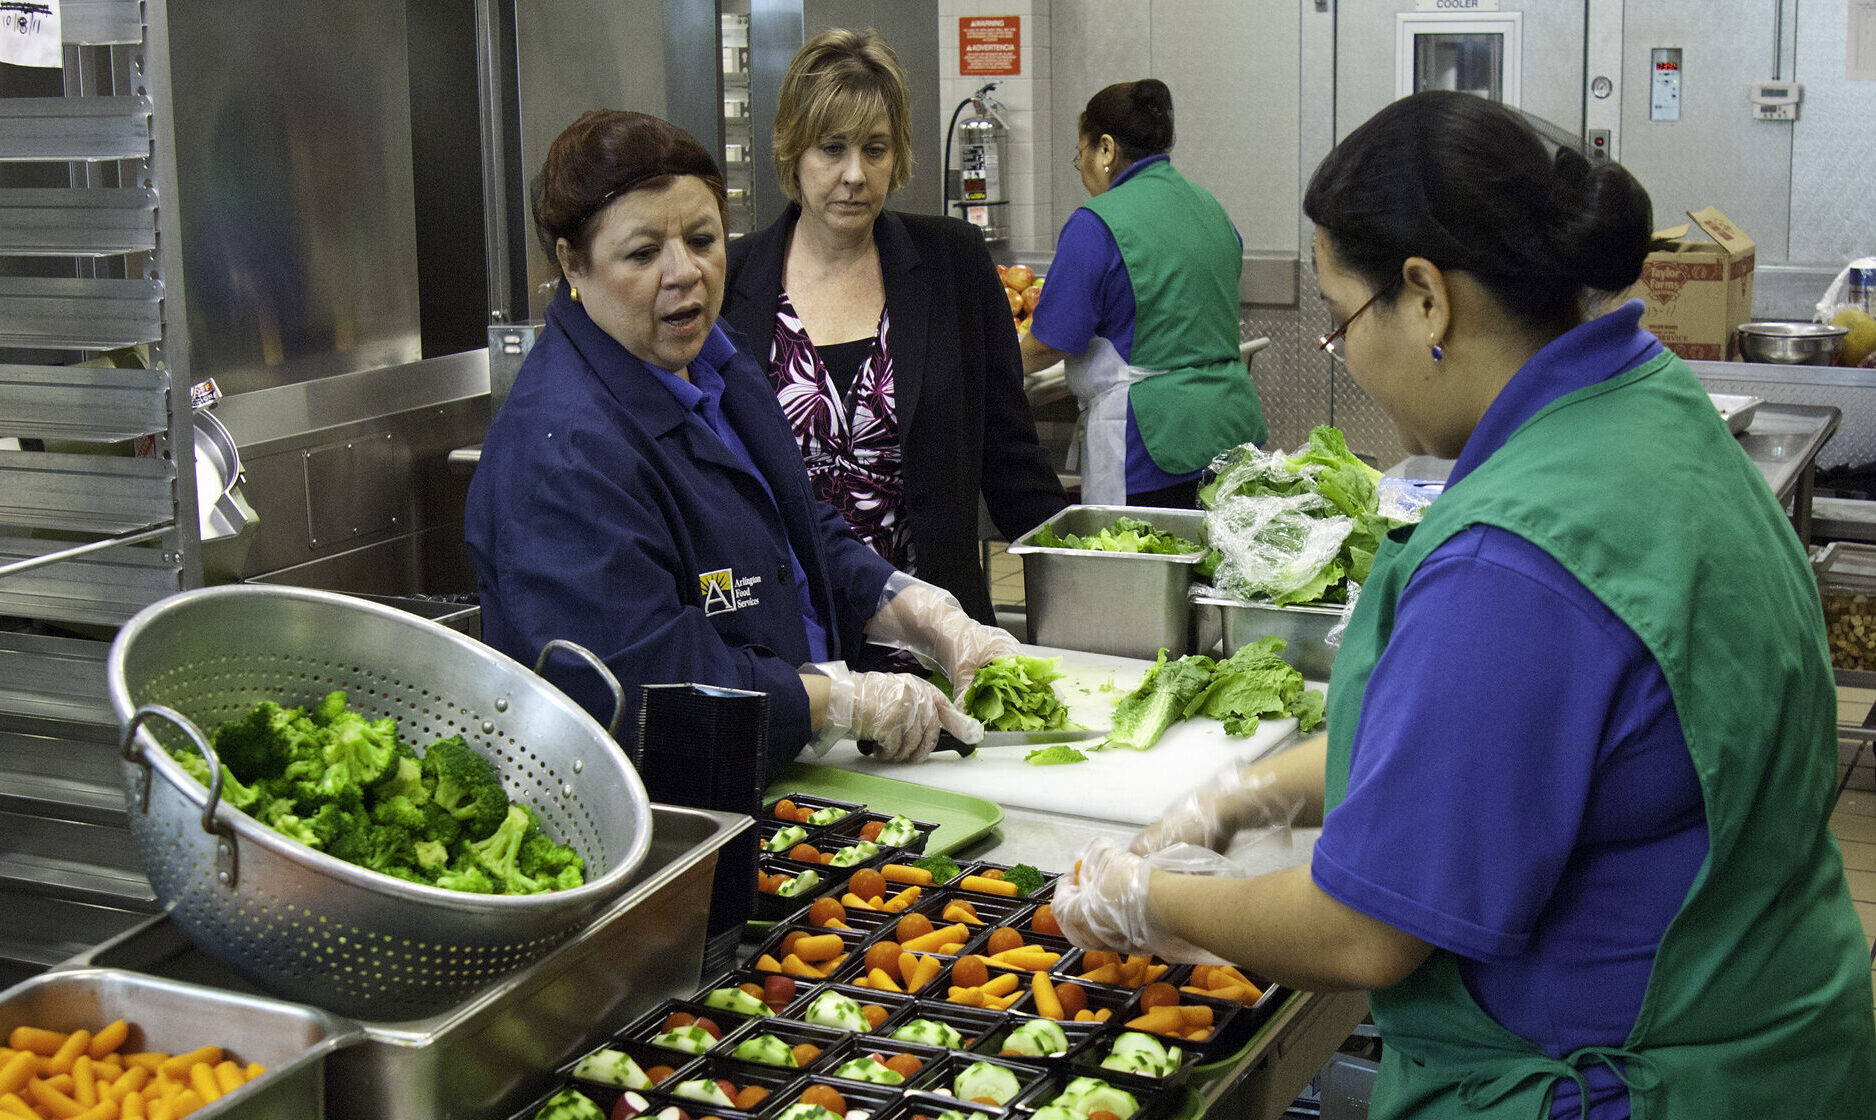 About Nevada School Meals